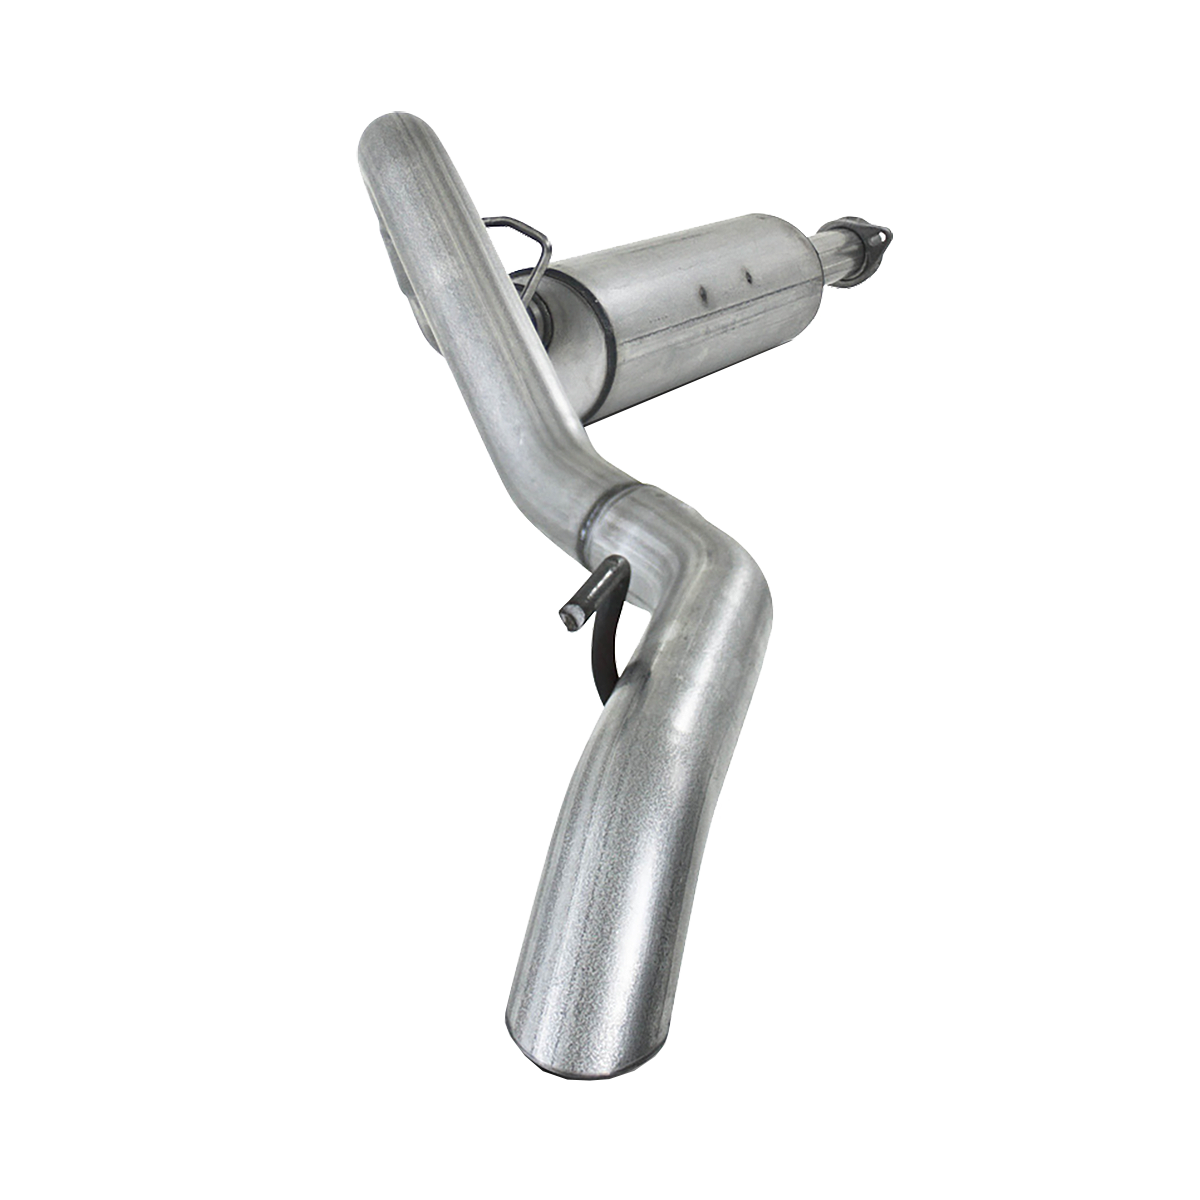 MBRP - MBRP Cat Back Exhaust System Single T409 Stainless Steel For 04-06 Jeep Wrangler TJ Unlimited, 4.0L I-6 S5520409